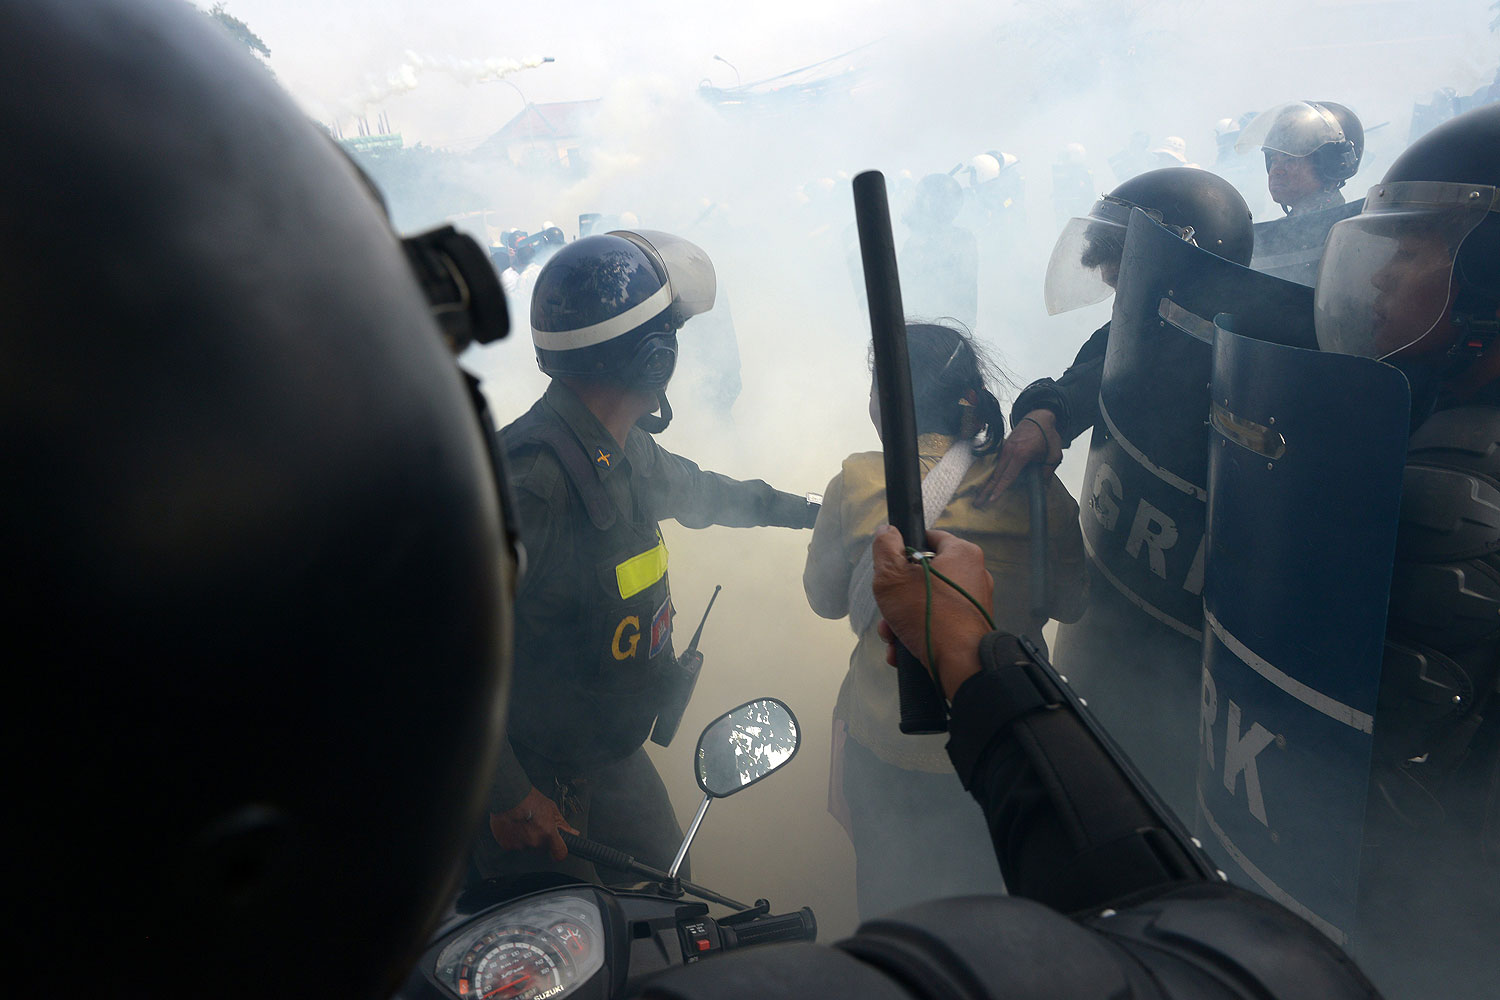 Cambodian military police clash with protesters during a protest in Phnom Penh on Jan. 27, 2014 (Tang Chhin Sothy / AFP / Getty Images)